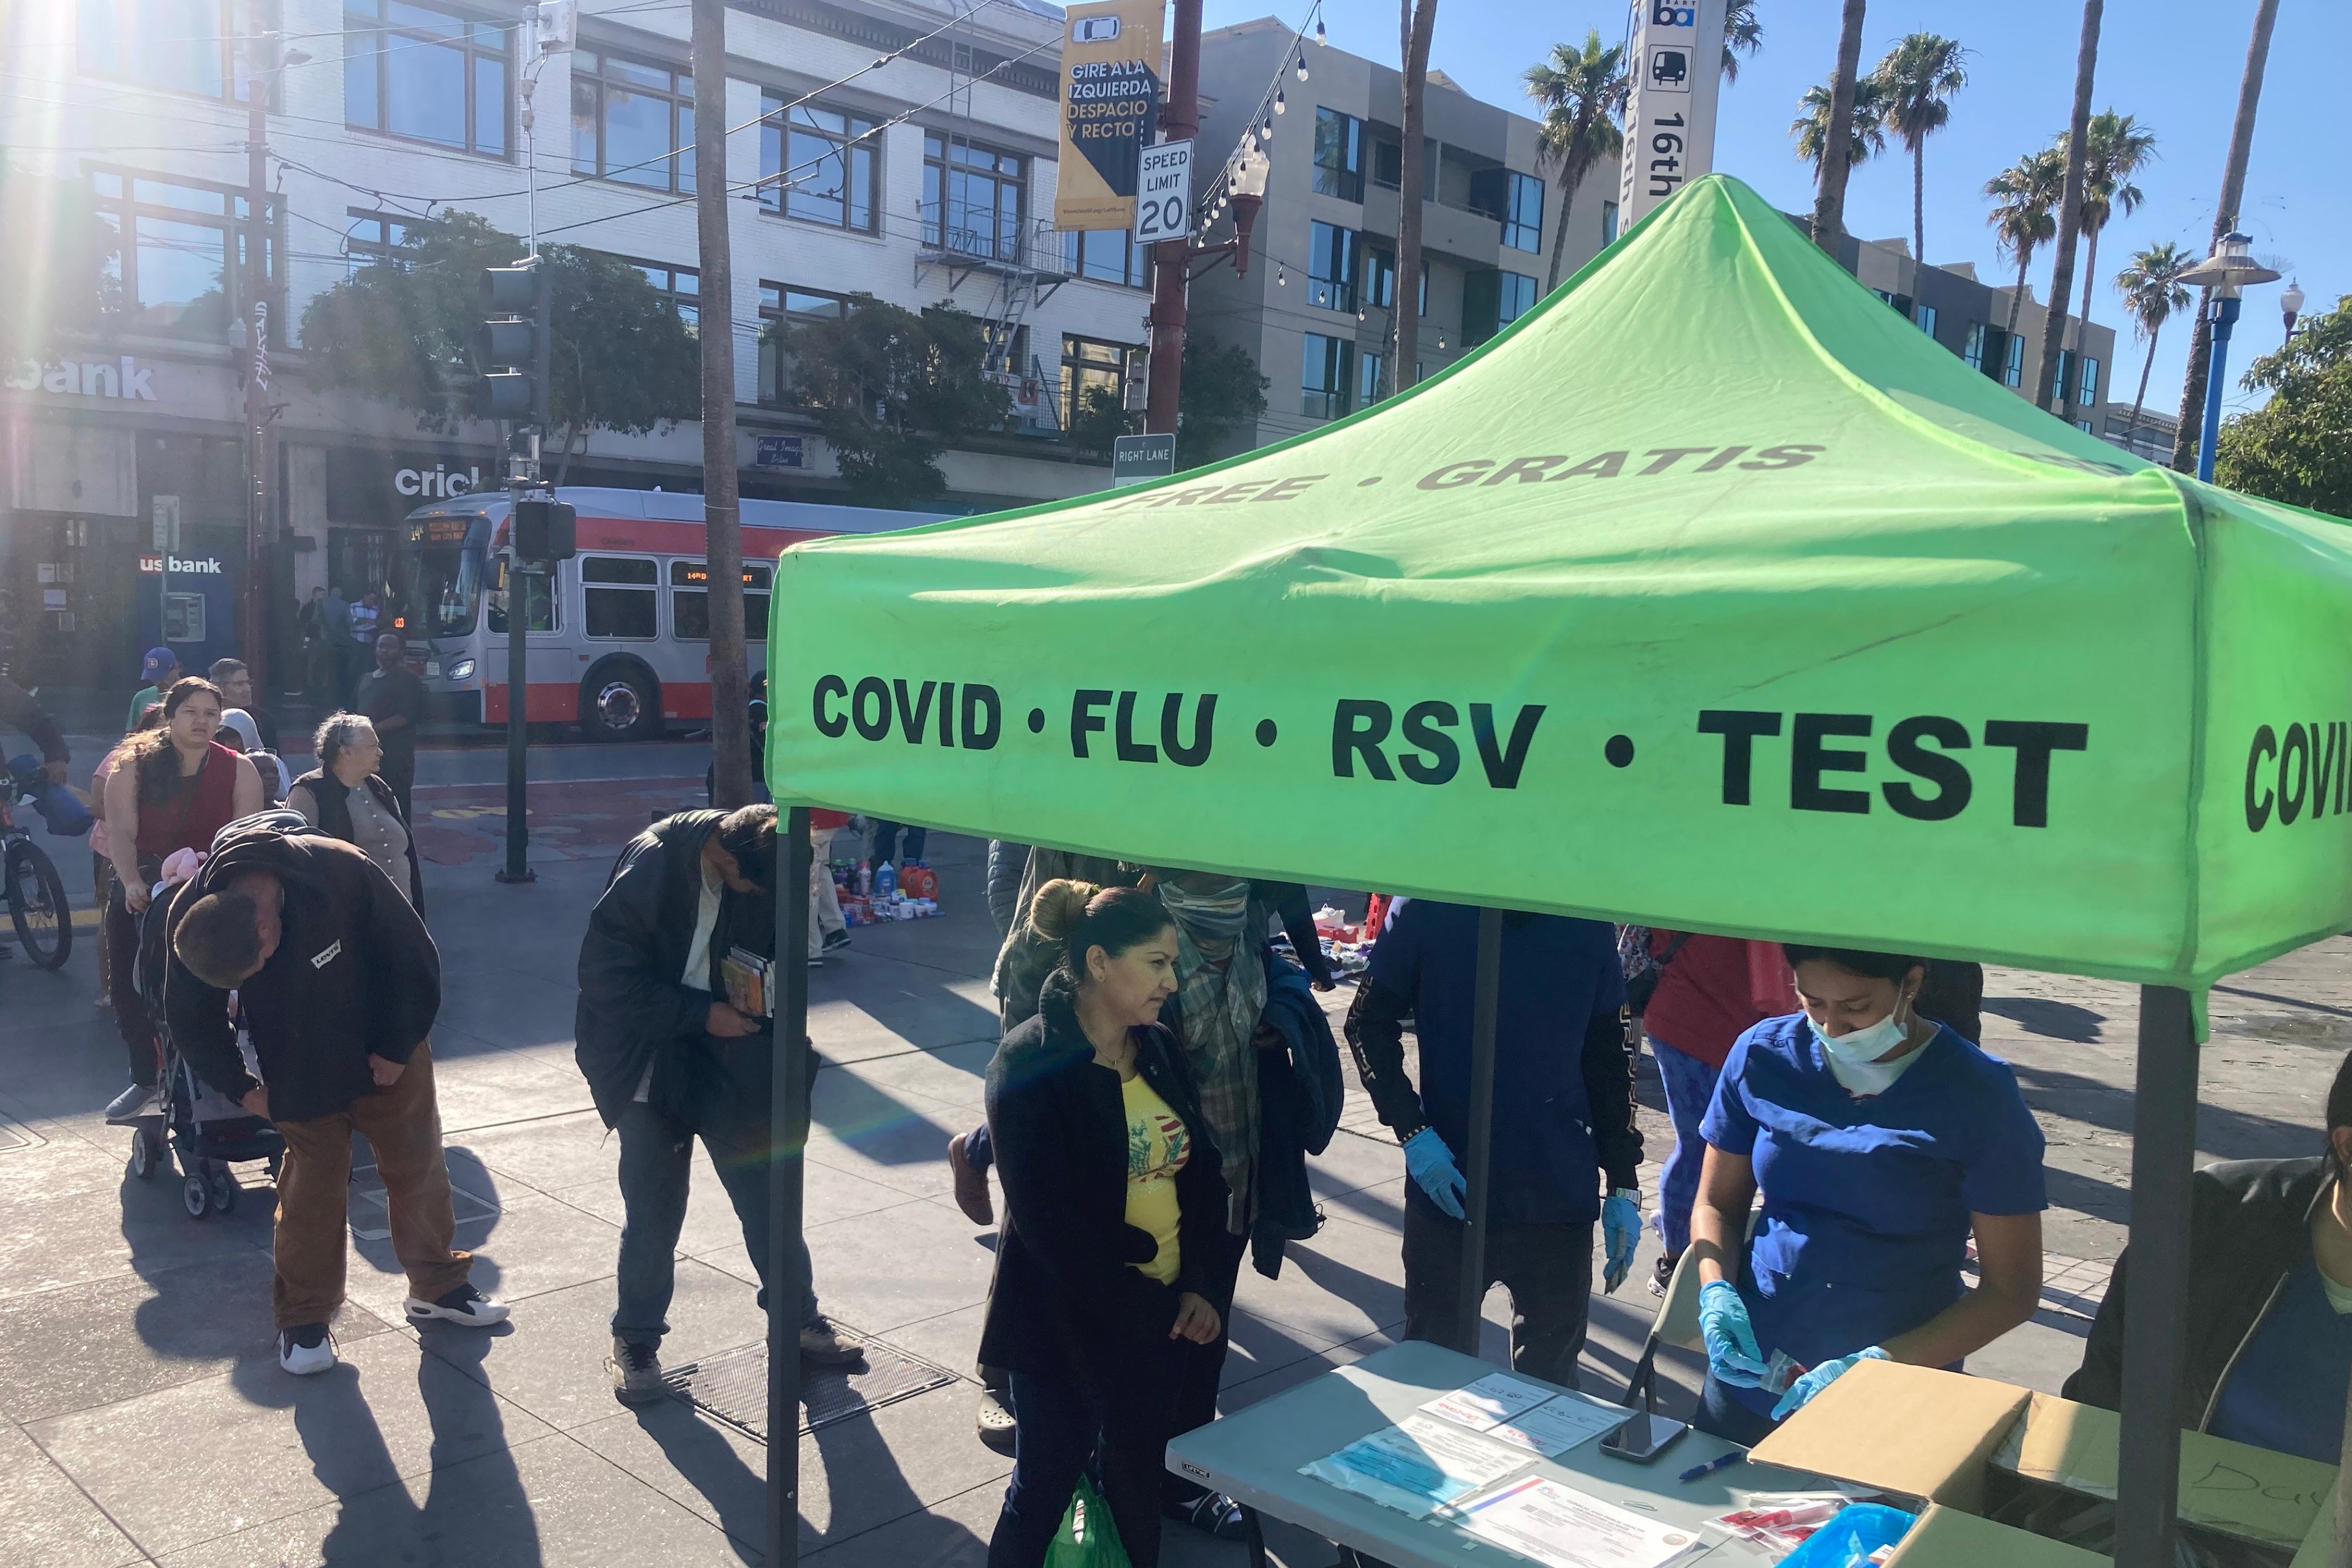 A green pop-up tent with the words COVID, FLU, RSV and TEST on its edge shelters people on a sunny day.